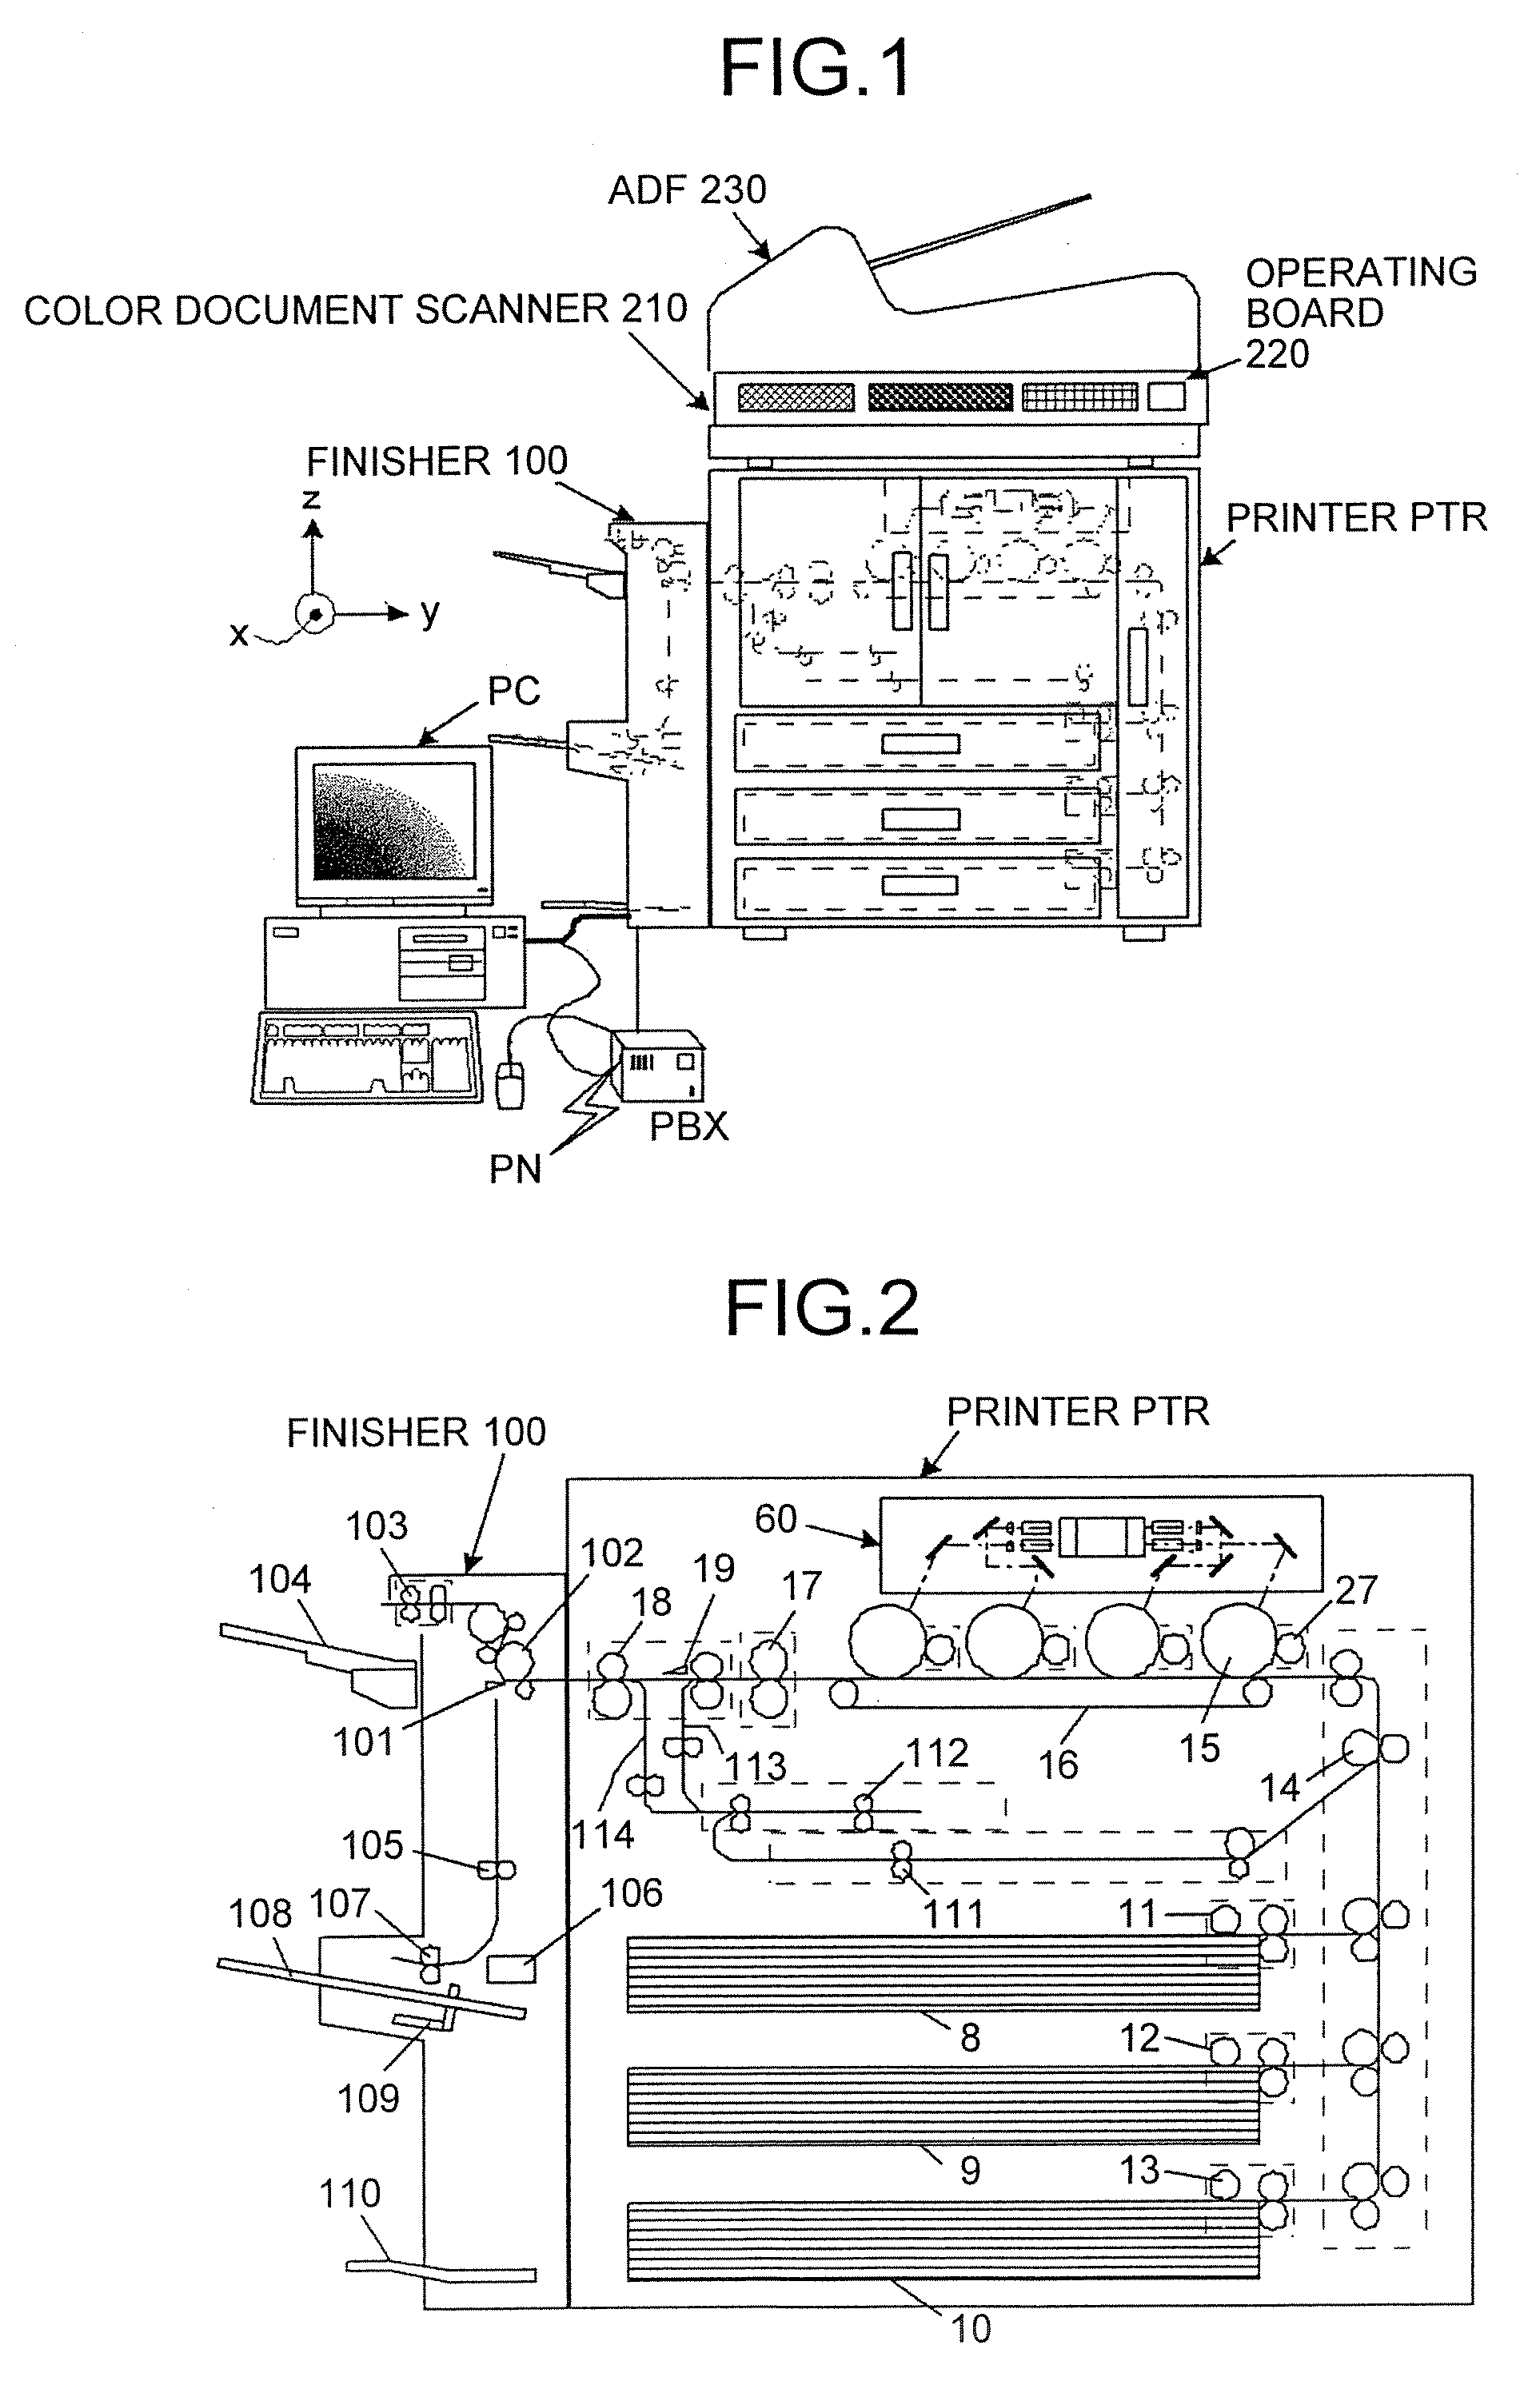 Image data processing device, image processing device, image forming device, and image transmitting system